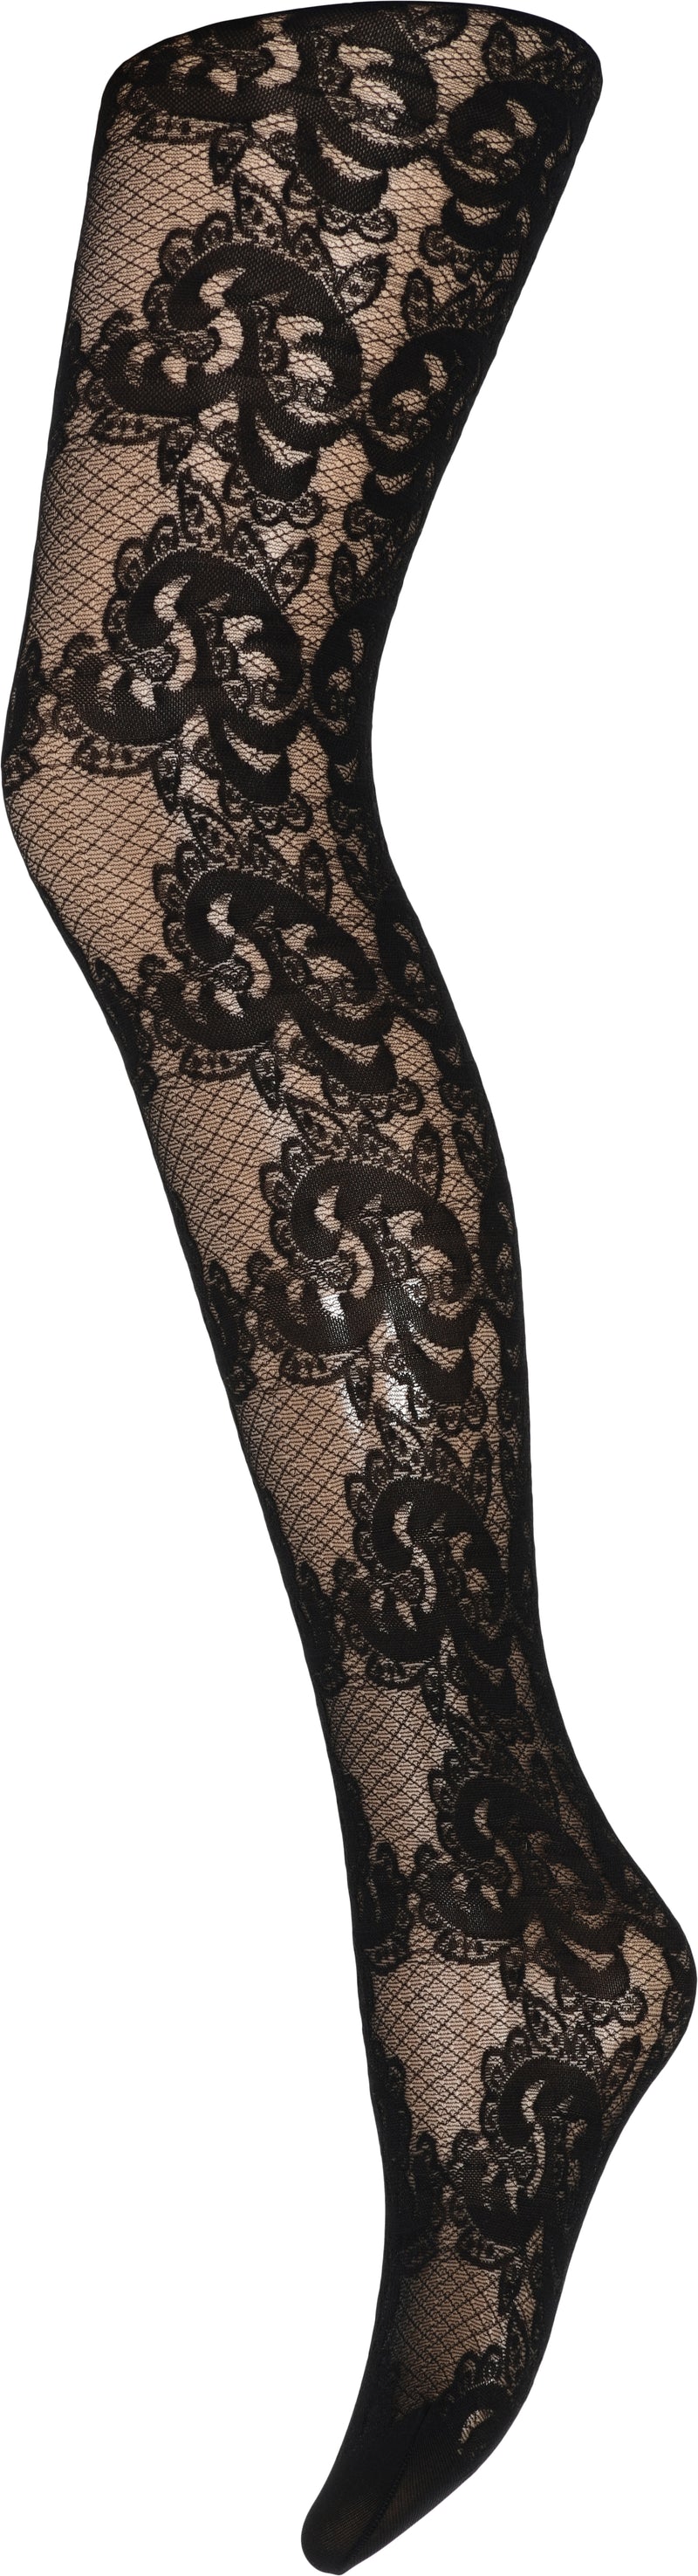 HYPE THE DETAIL tight lace 30 den - Black - 3-16024-77-1100